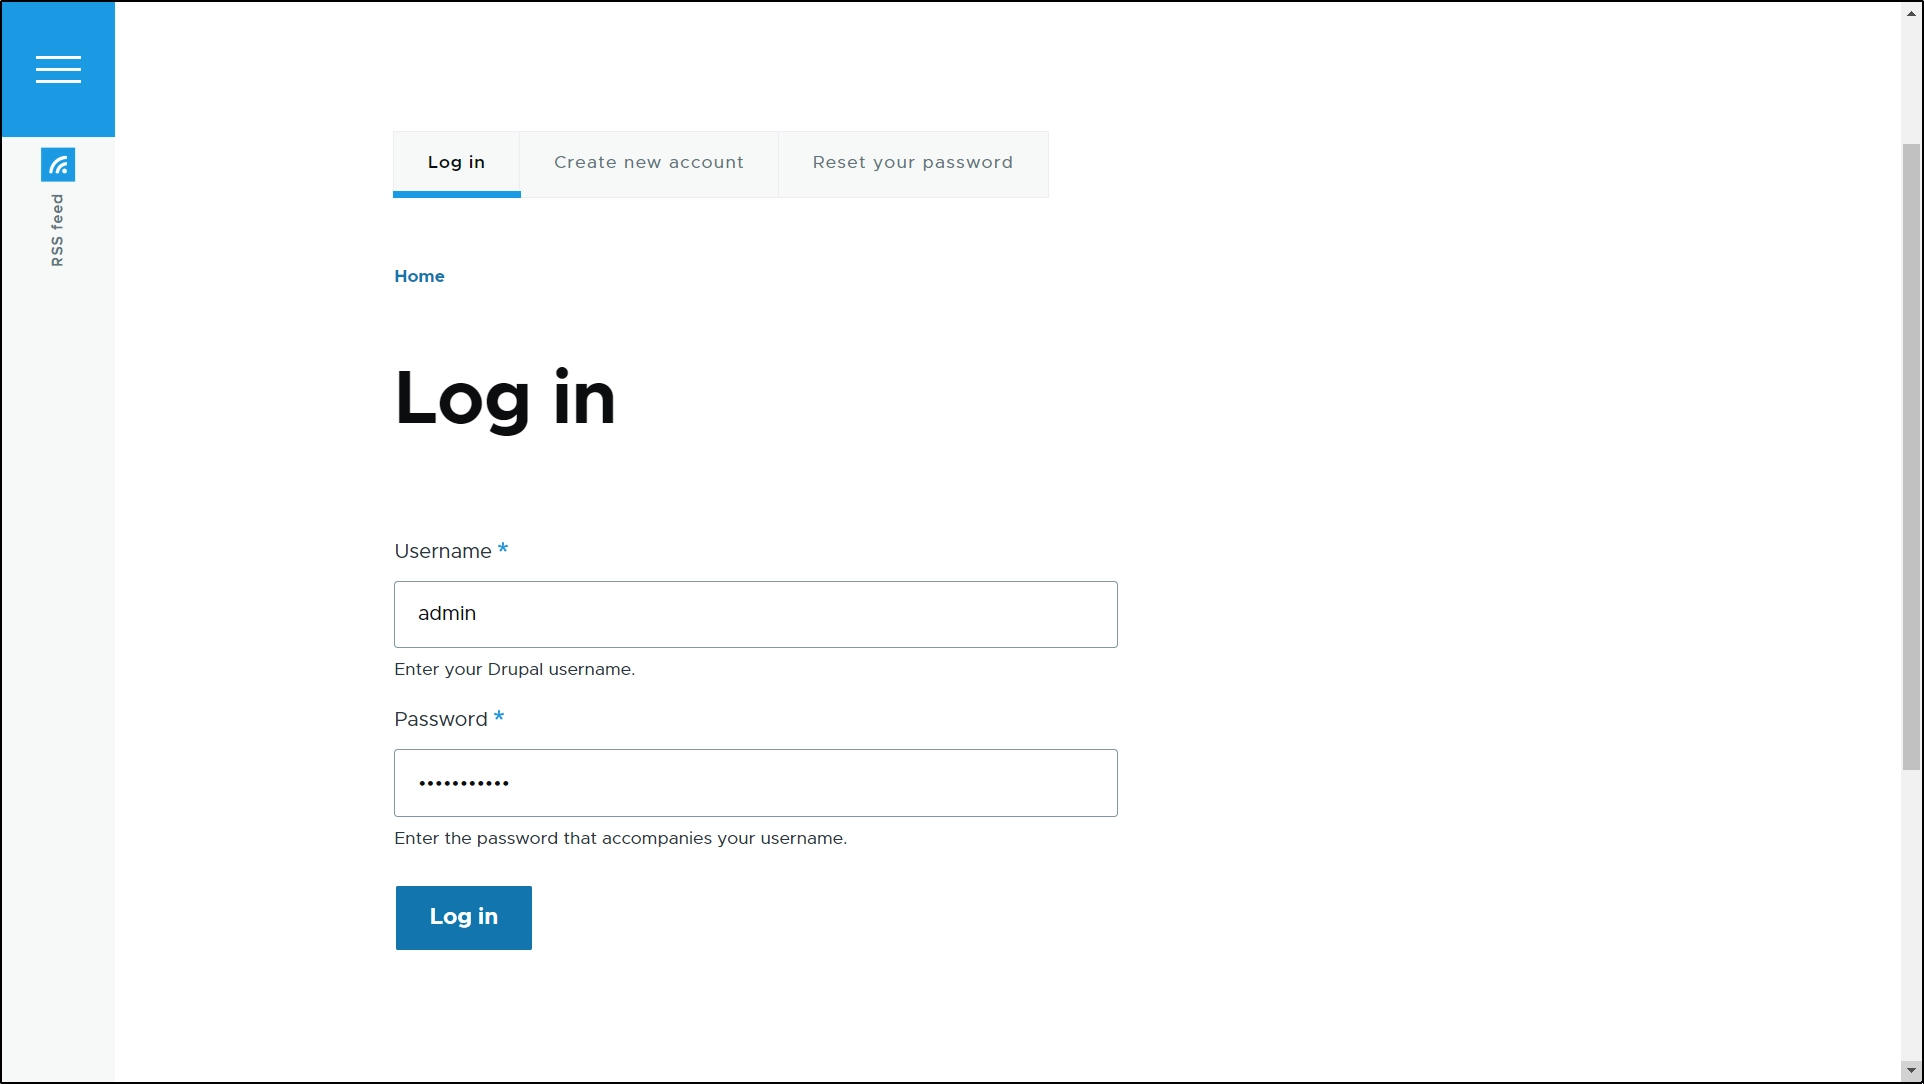 Sign in with your Drupal credentials and click on Log in